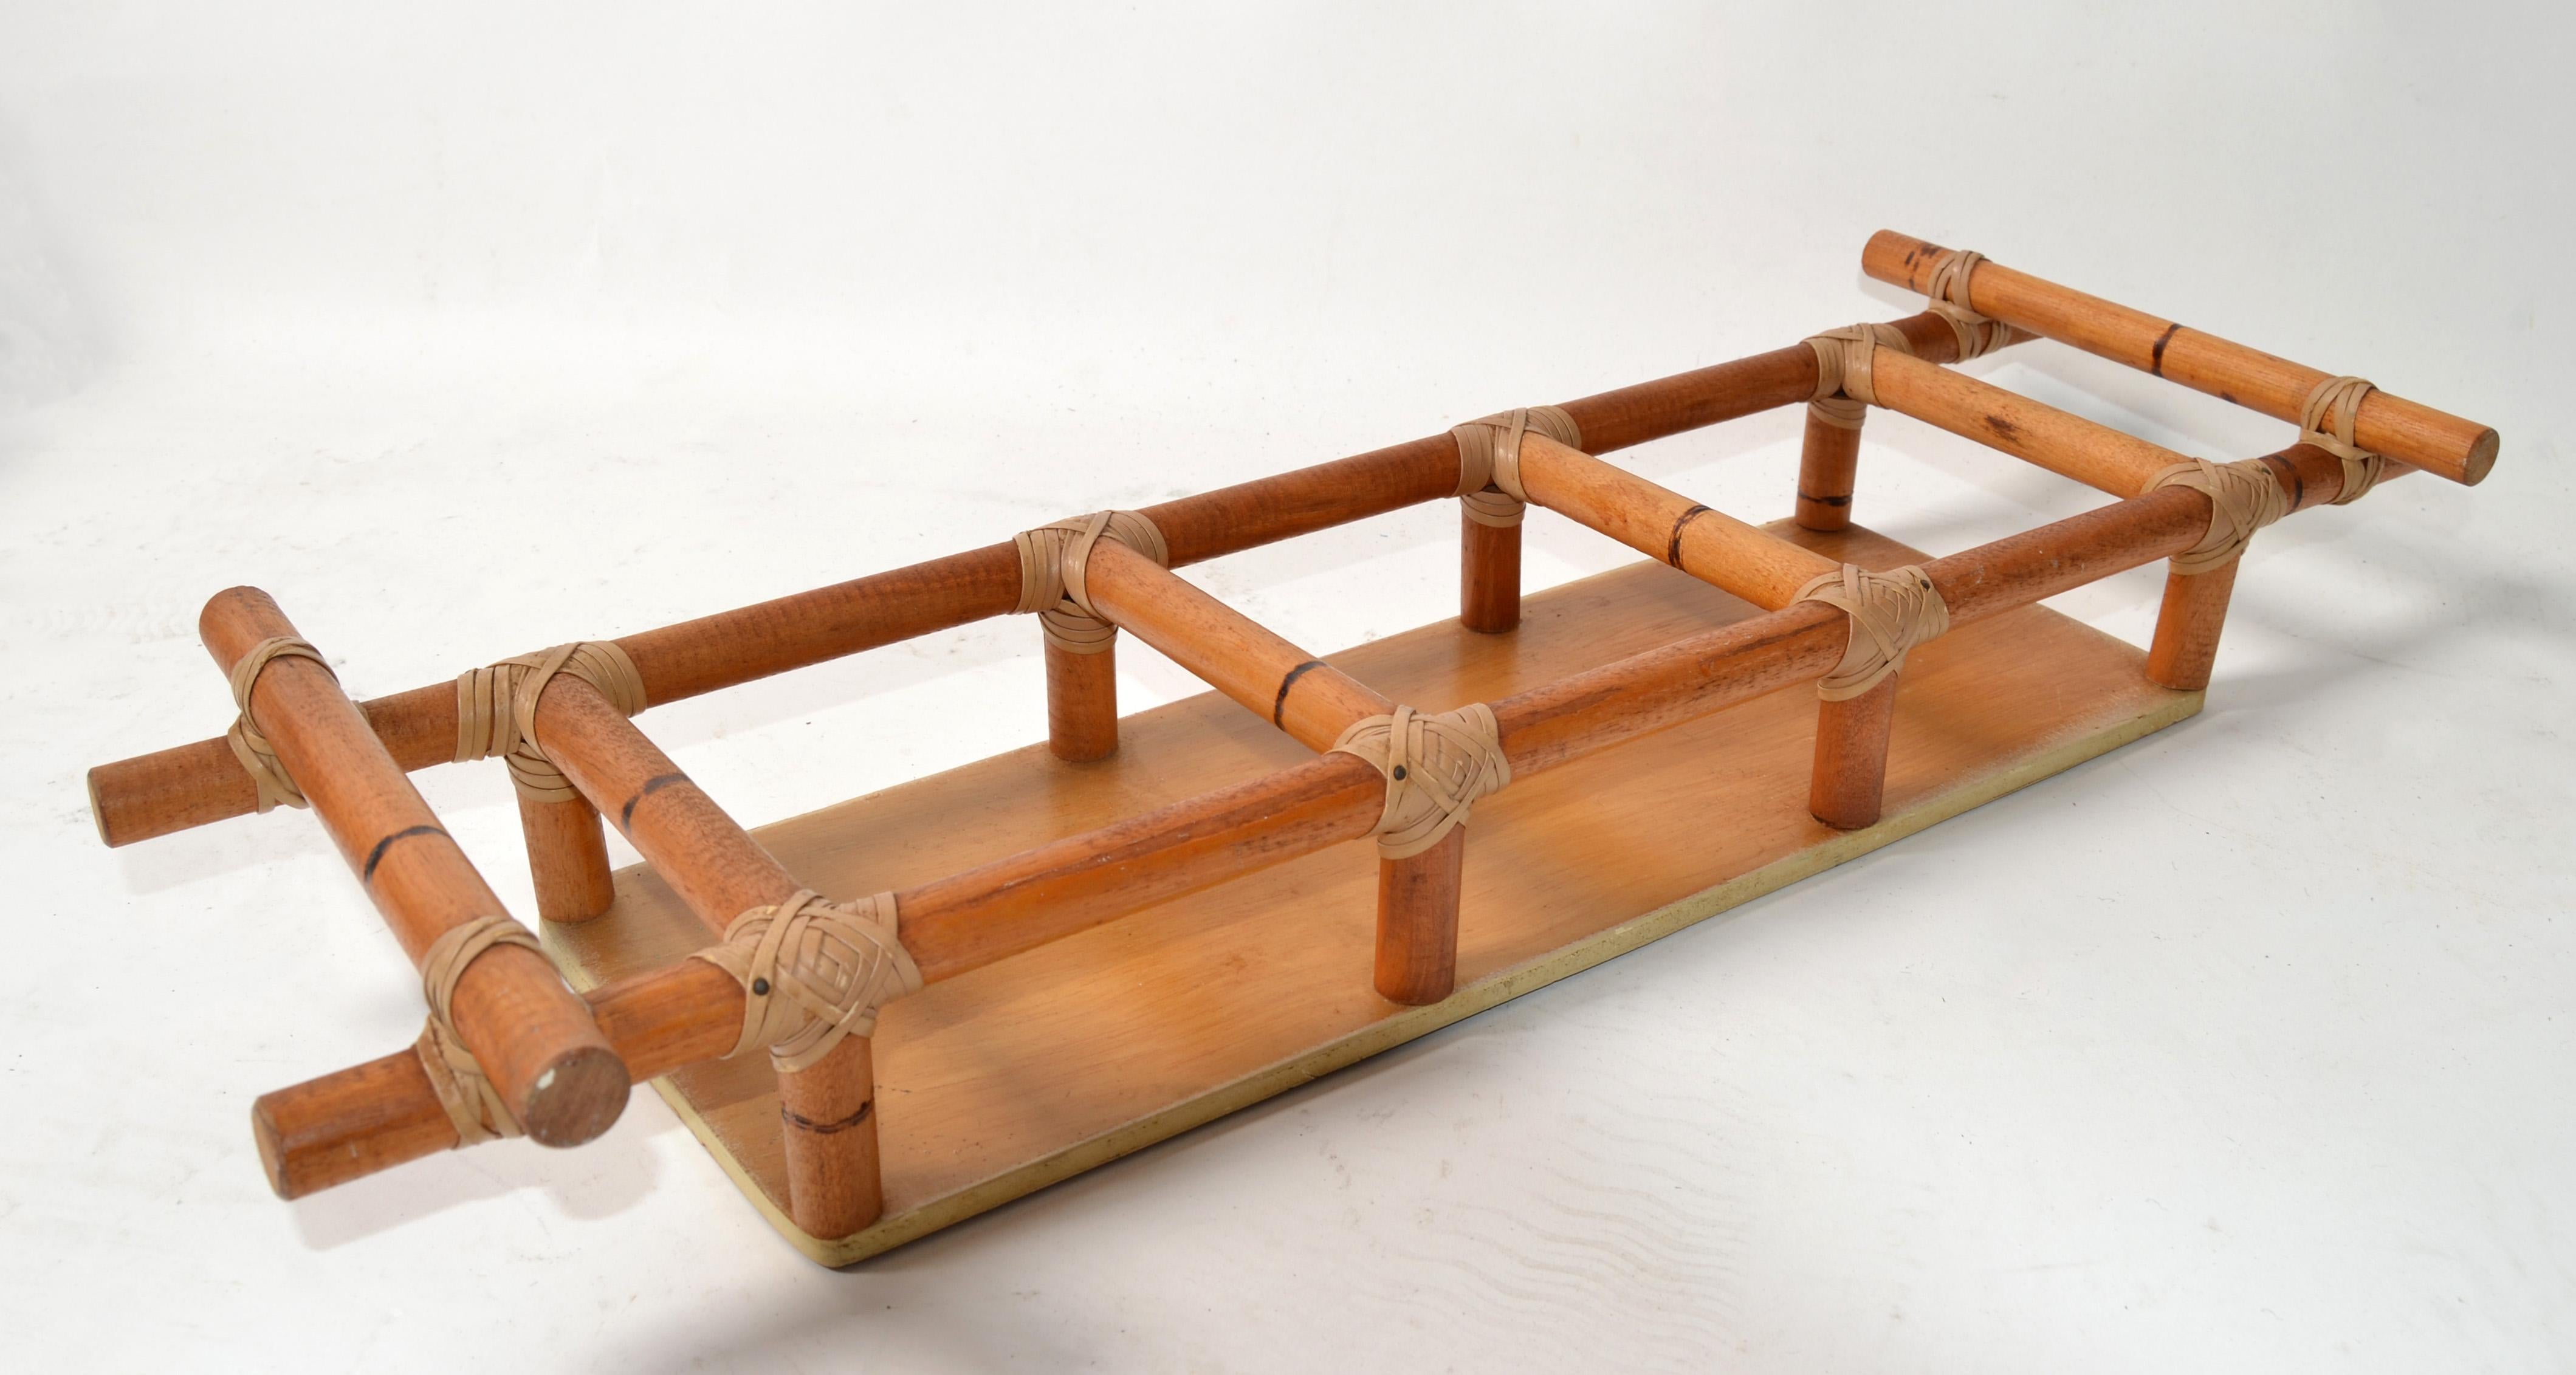 Vintage Boho Chic Mid-Century Modern Burnt Bamboo, Wood and hand-woven leather Bindings rectangle Kitchen Serving Tray, Spice Rack or Breakfast Platter.
The Storage Tray provides 3 compartments for Oil, Vinegar and Mustard or Honey, Jelly and